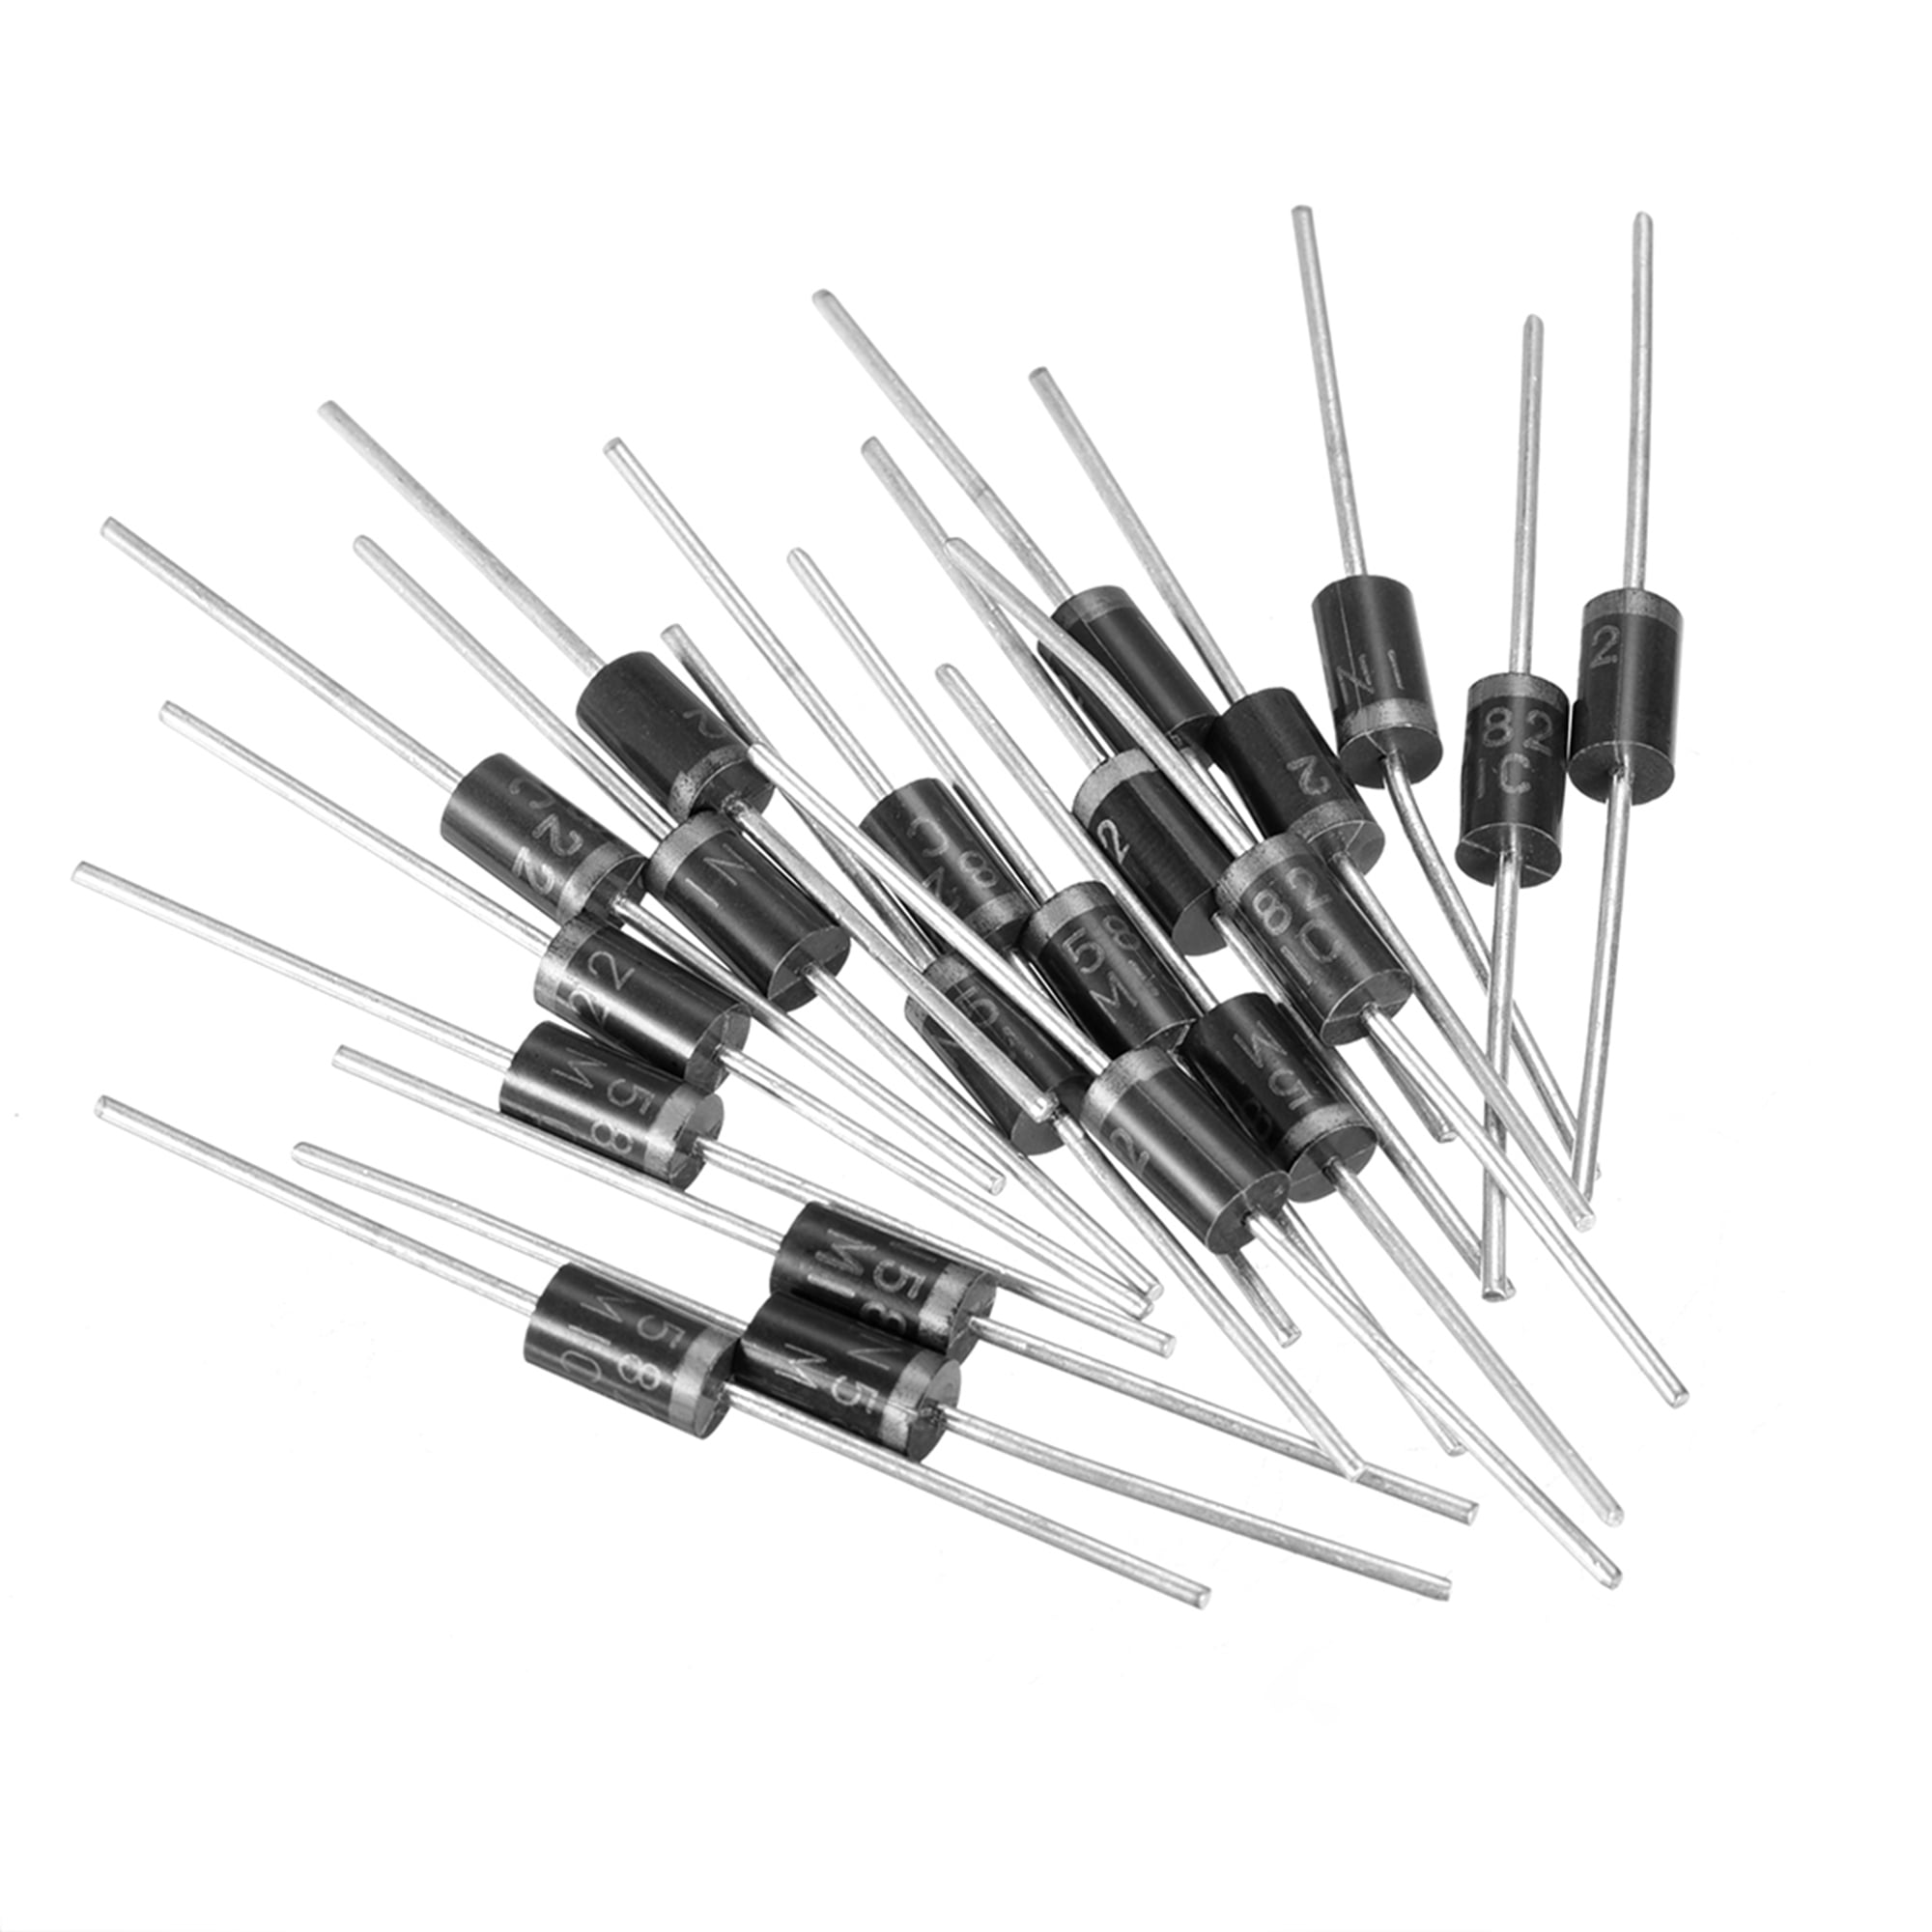 uxcell Rectifier Diode 2A 200V Axial Electronic Silicon Diodes 100pcs for HER203